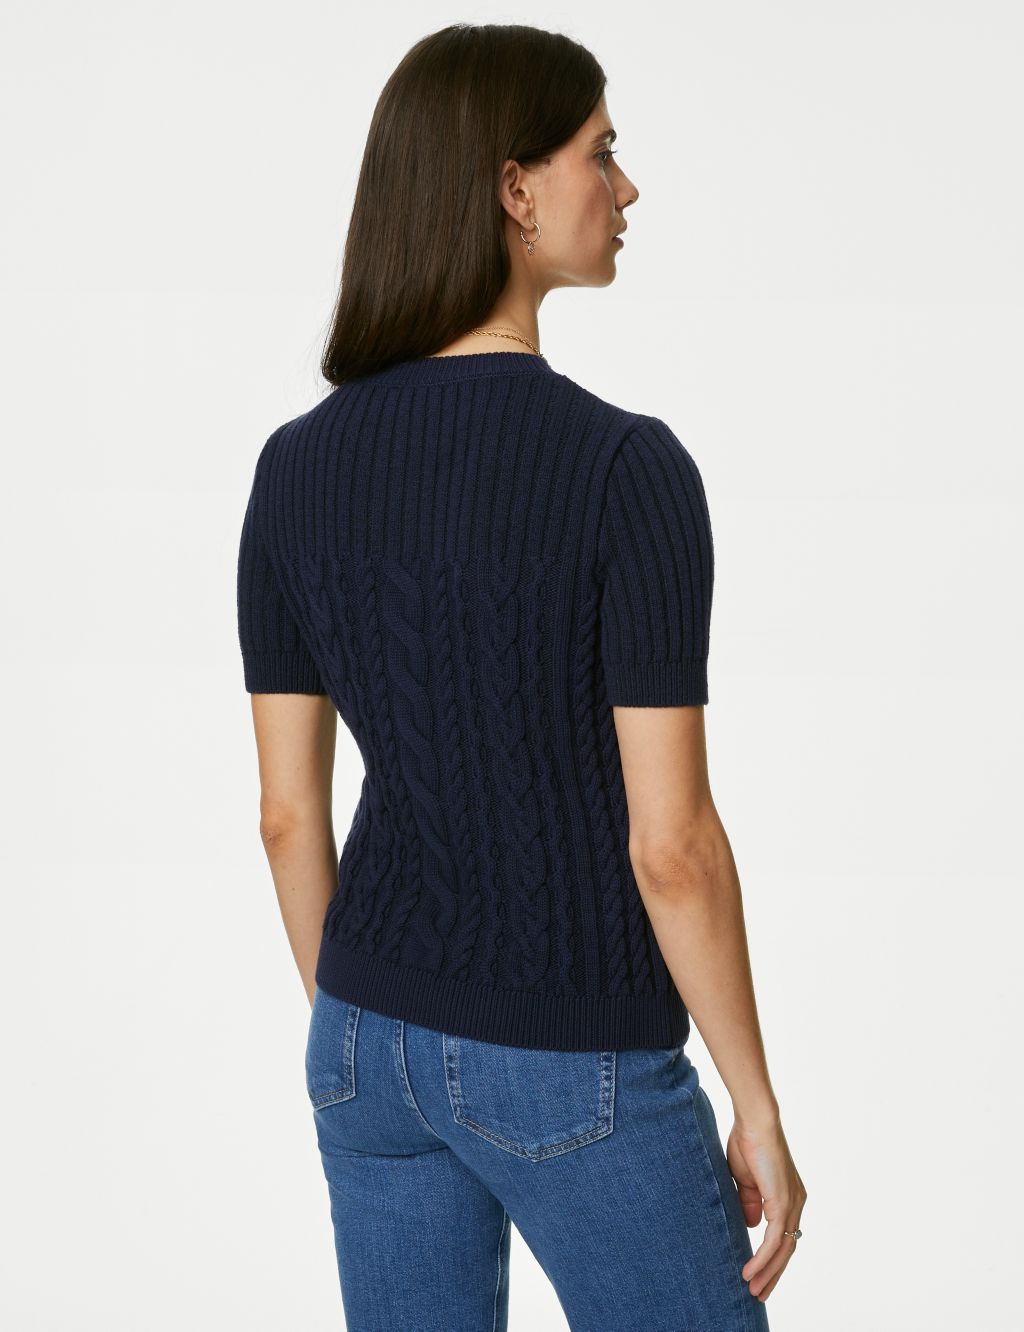 Cotton Rich Cable Knit Knitted Top image 5